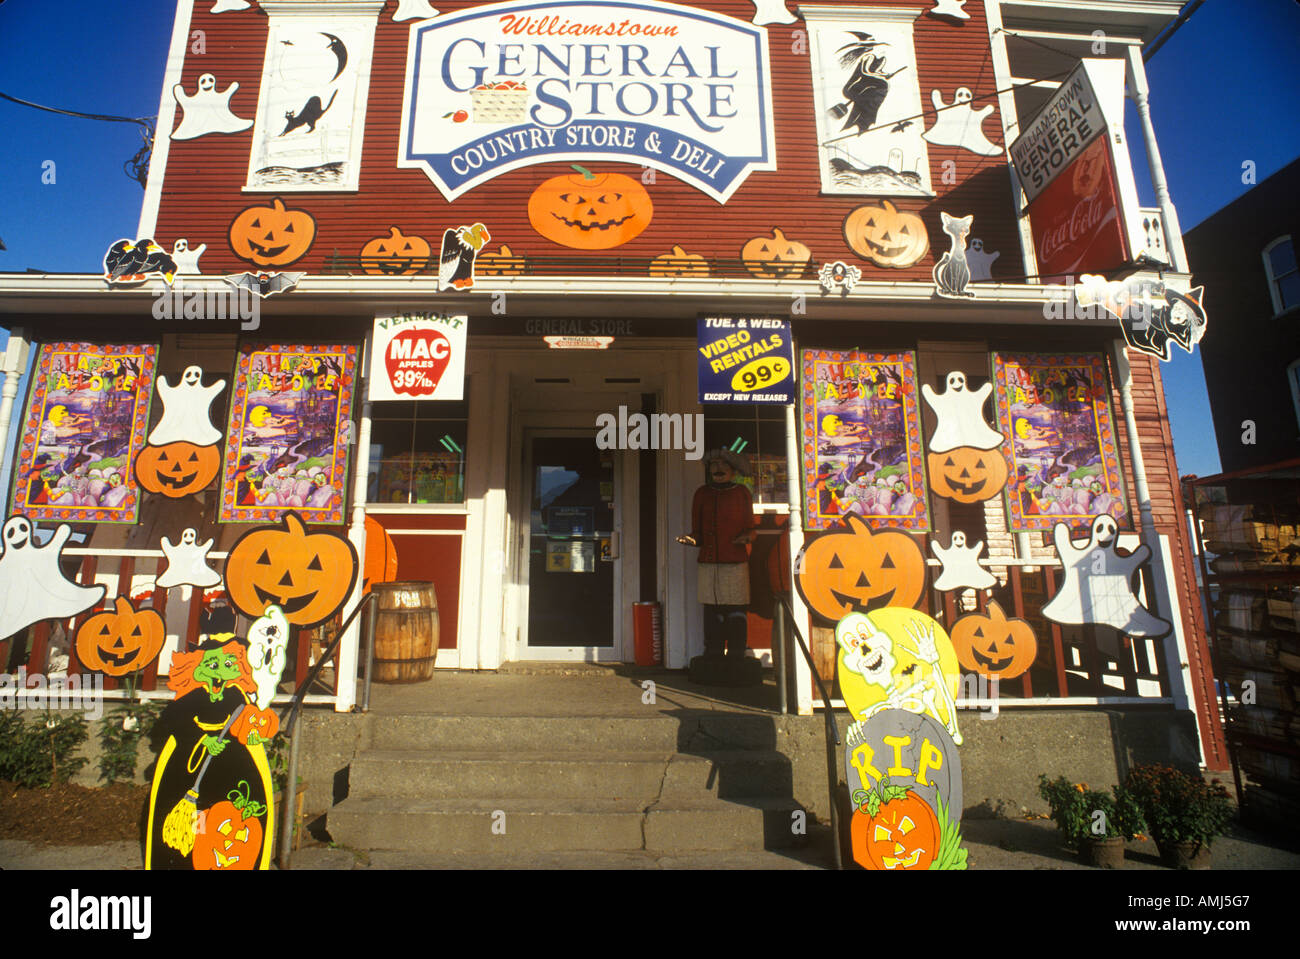 Country Store in Williamstown VT covered with Halloween decorations Stock Photo